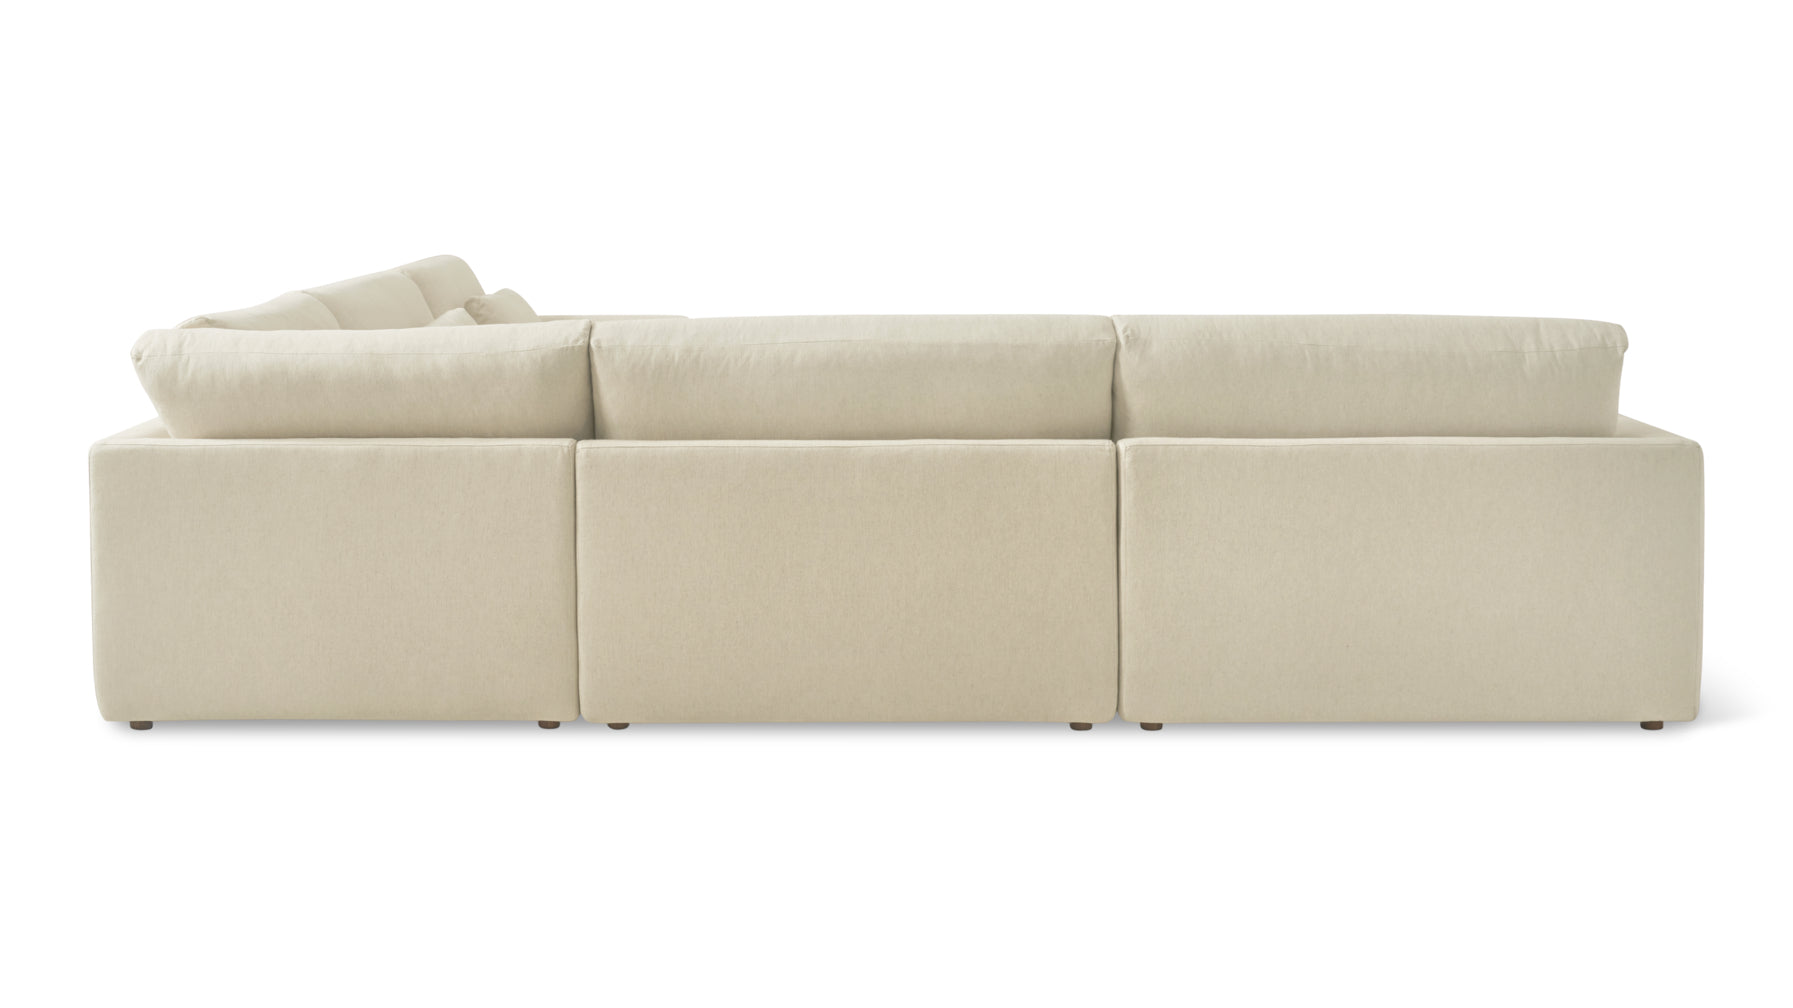 Wind Down 5-Piece Modular Sectional Closed, Beach - Image 5